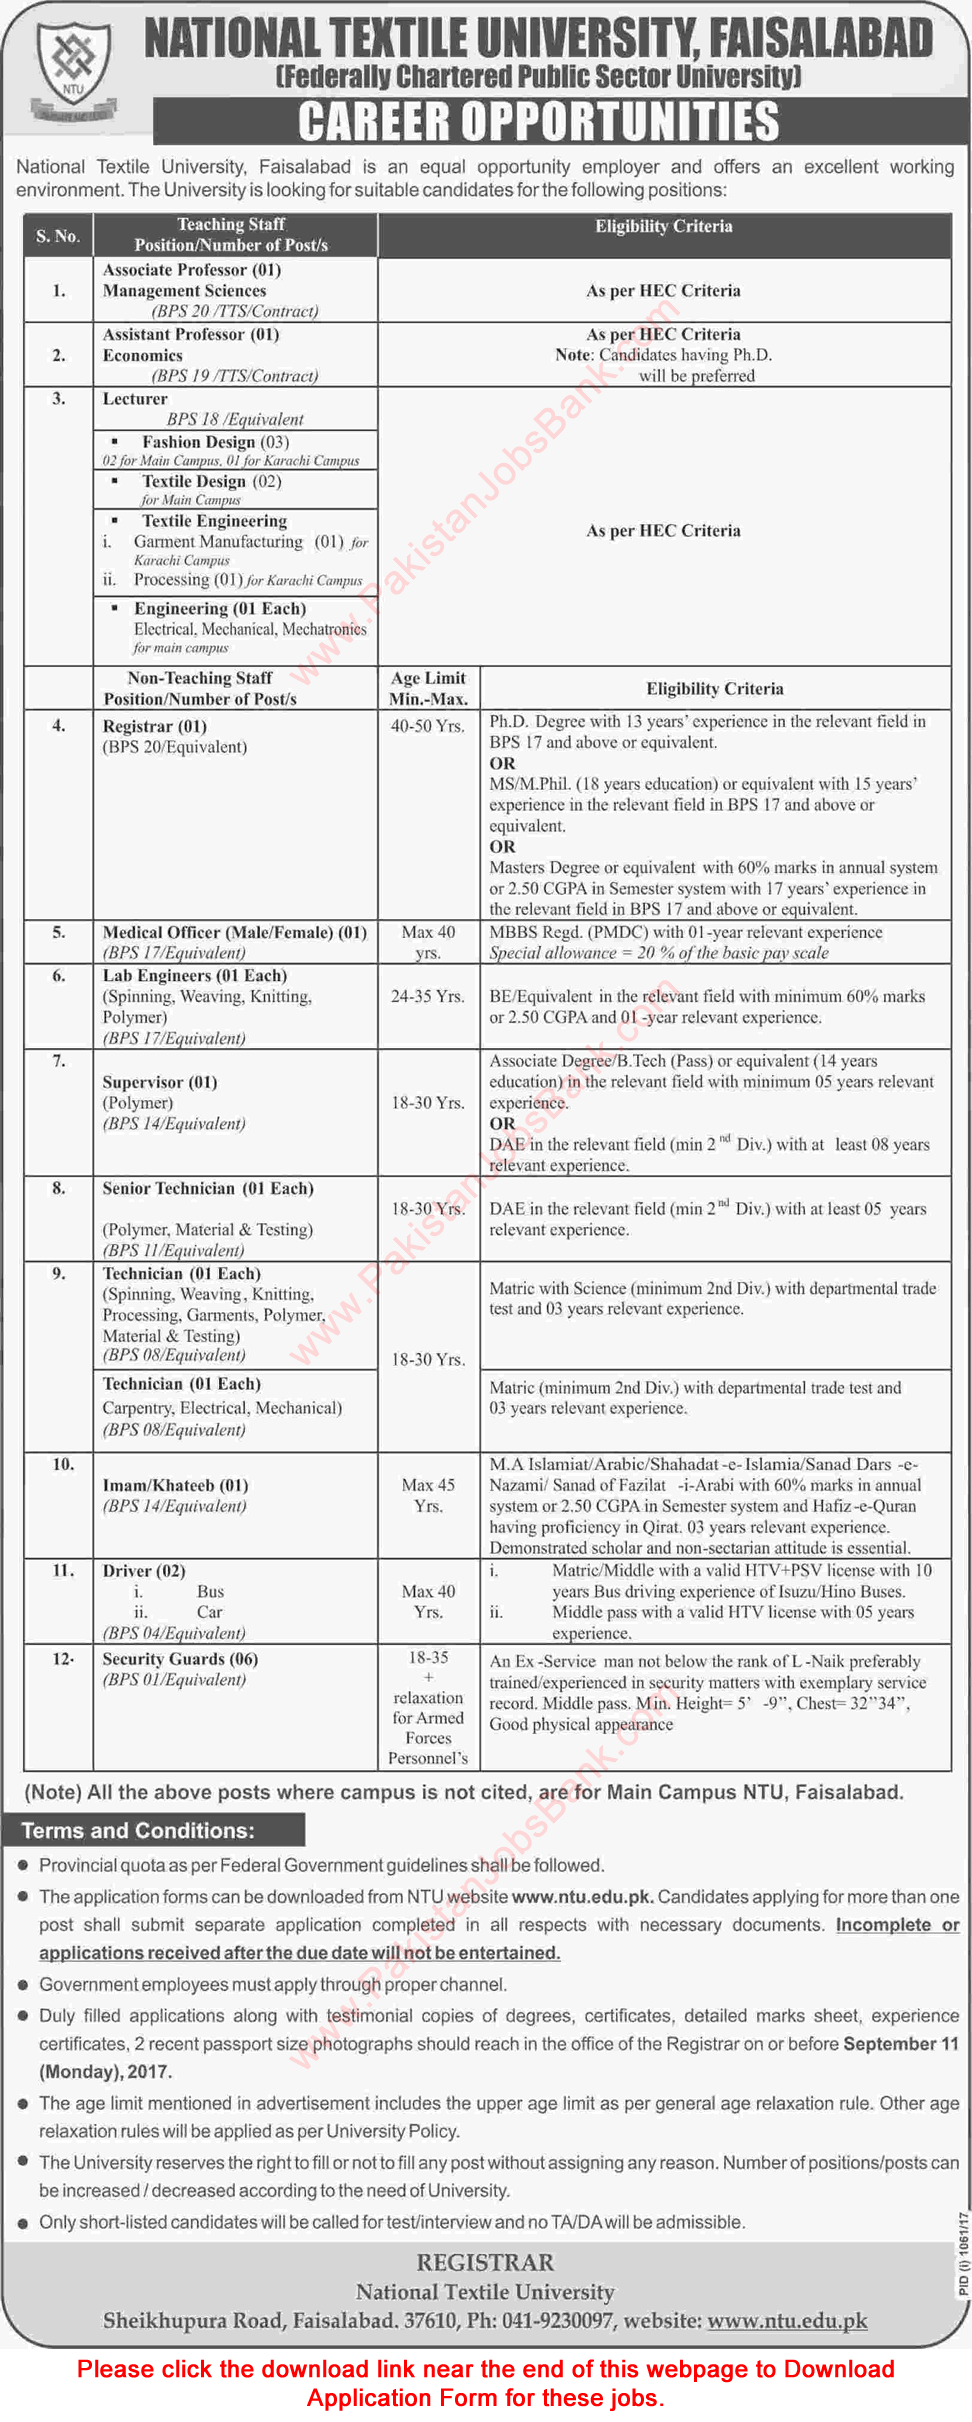 National Textile University Faisalabad Jobs August 2017 NTU Application Form Teaching Faculty & Others Latest